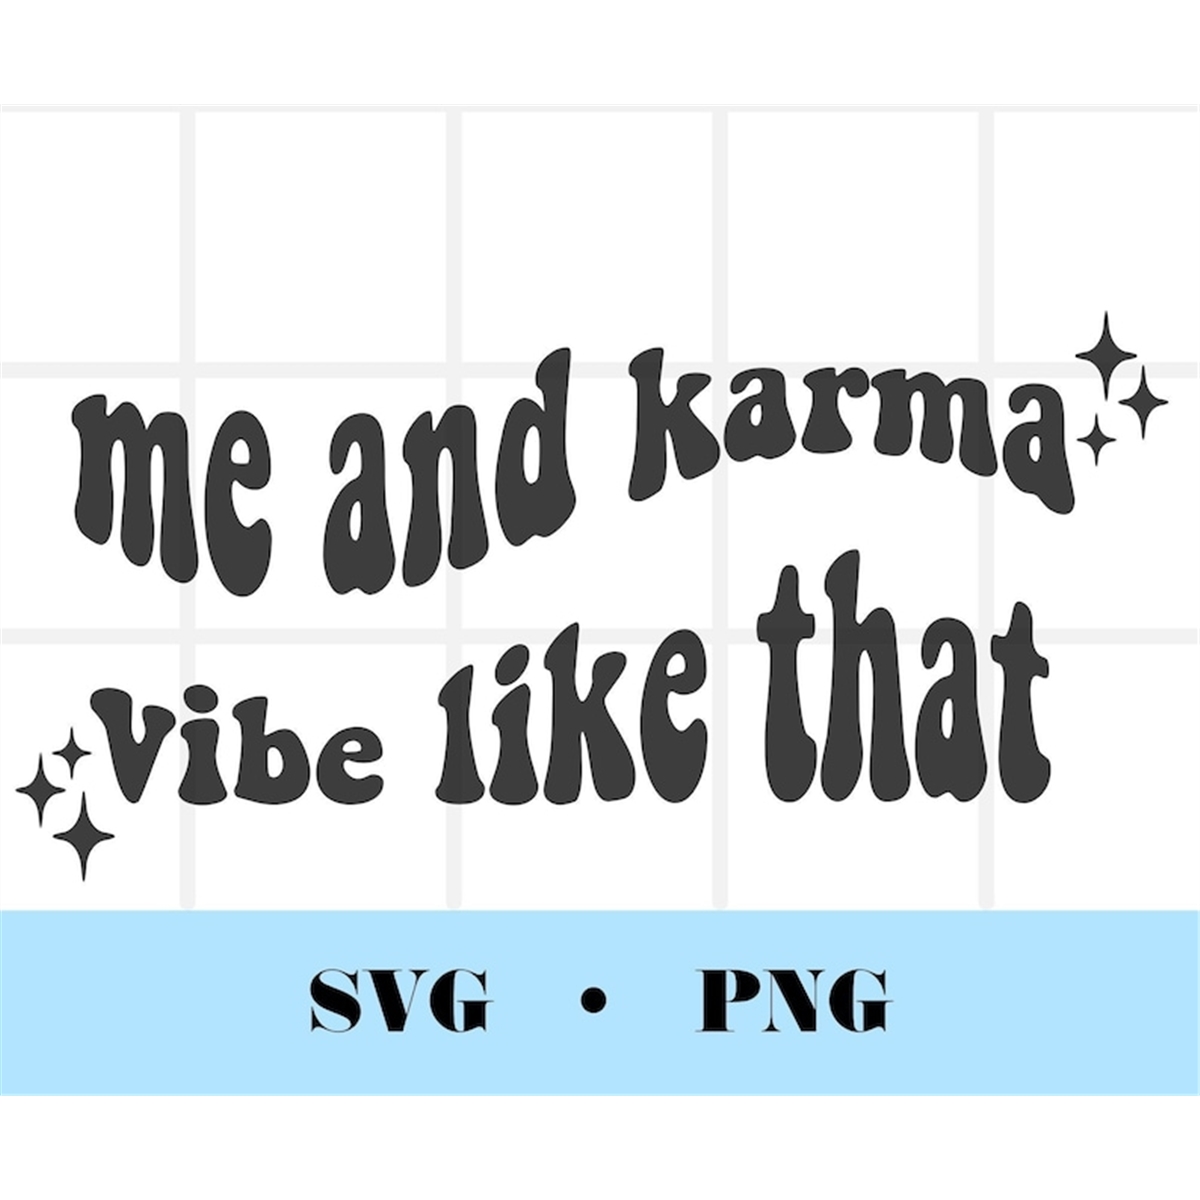 me-and-karma-vibe-like-that-svg-taylor-swift-svg-midnights-image-1